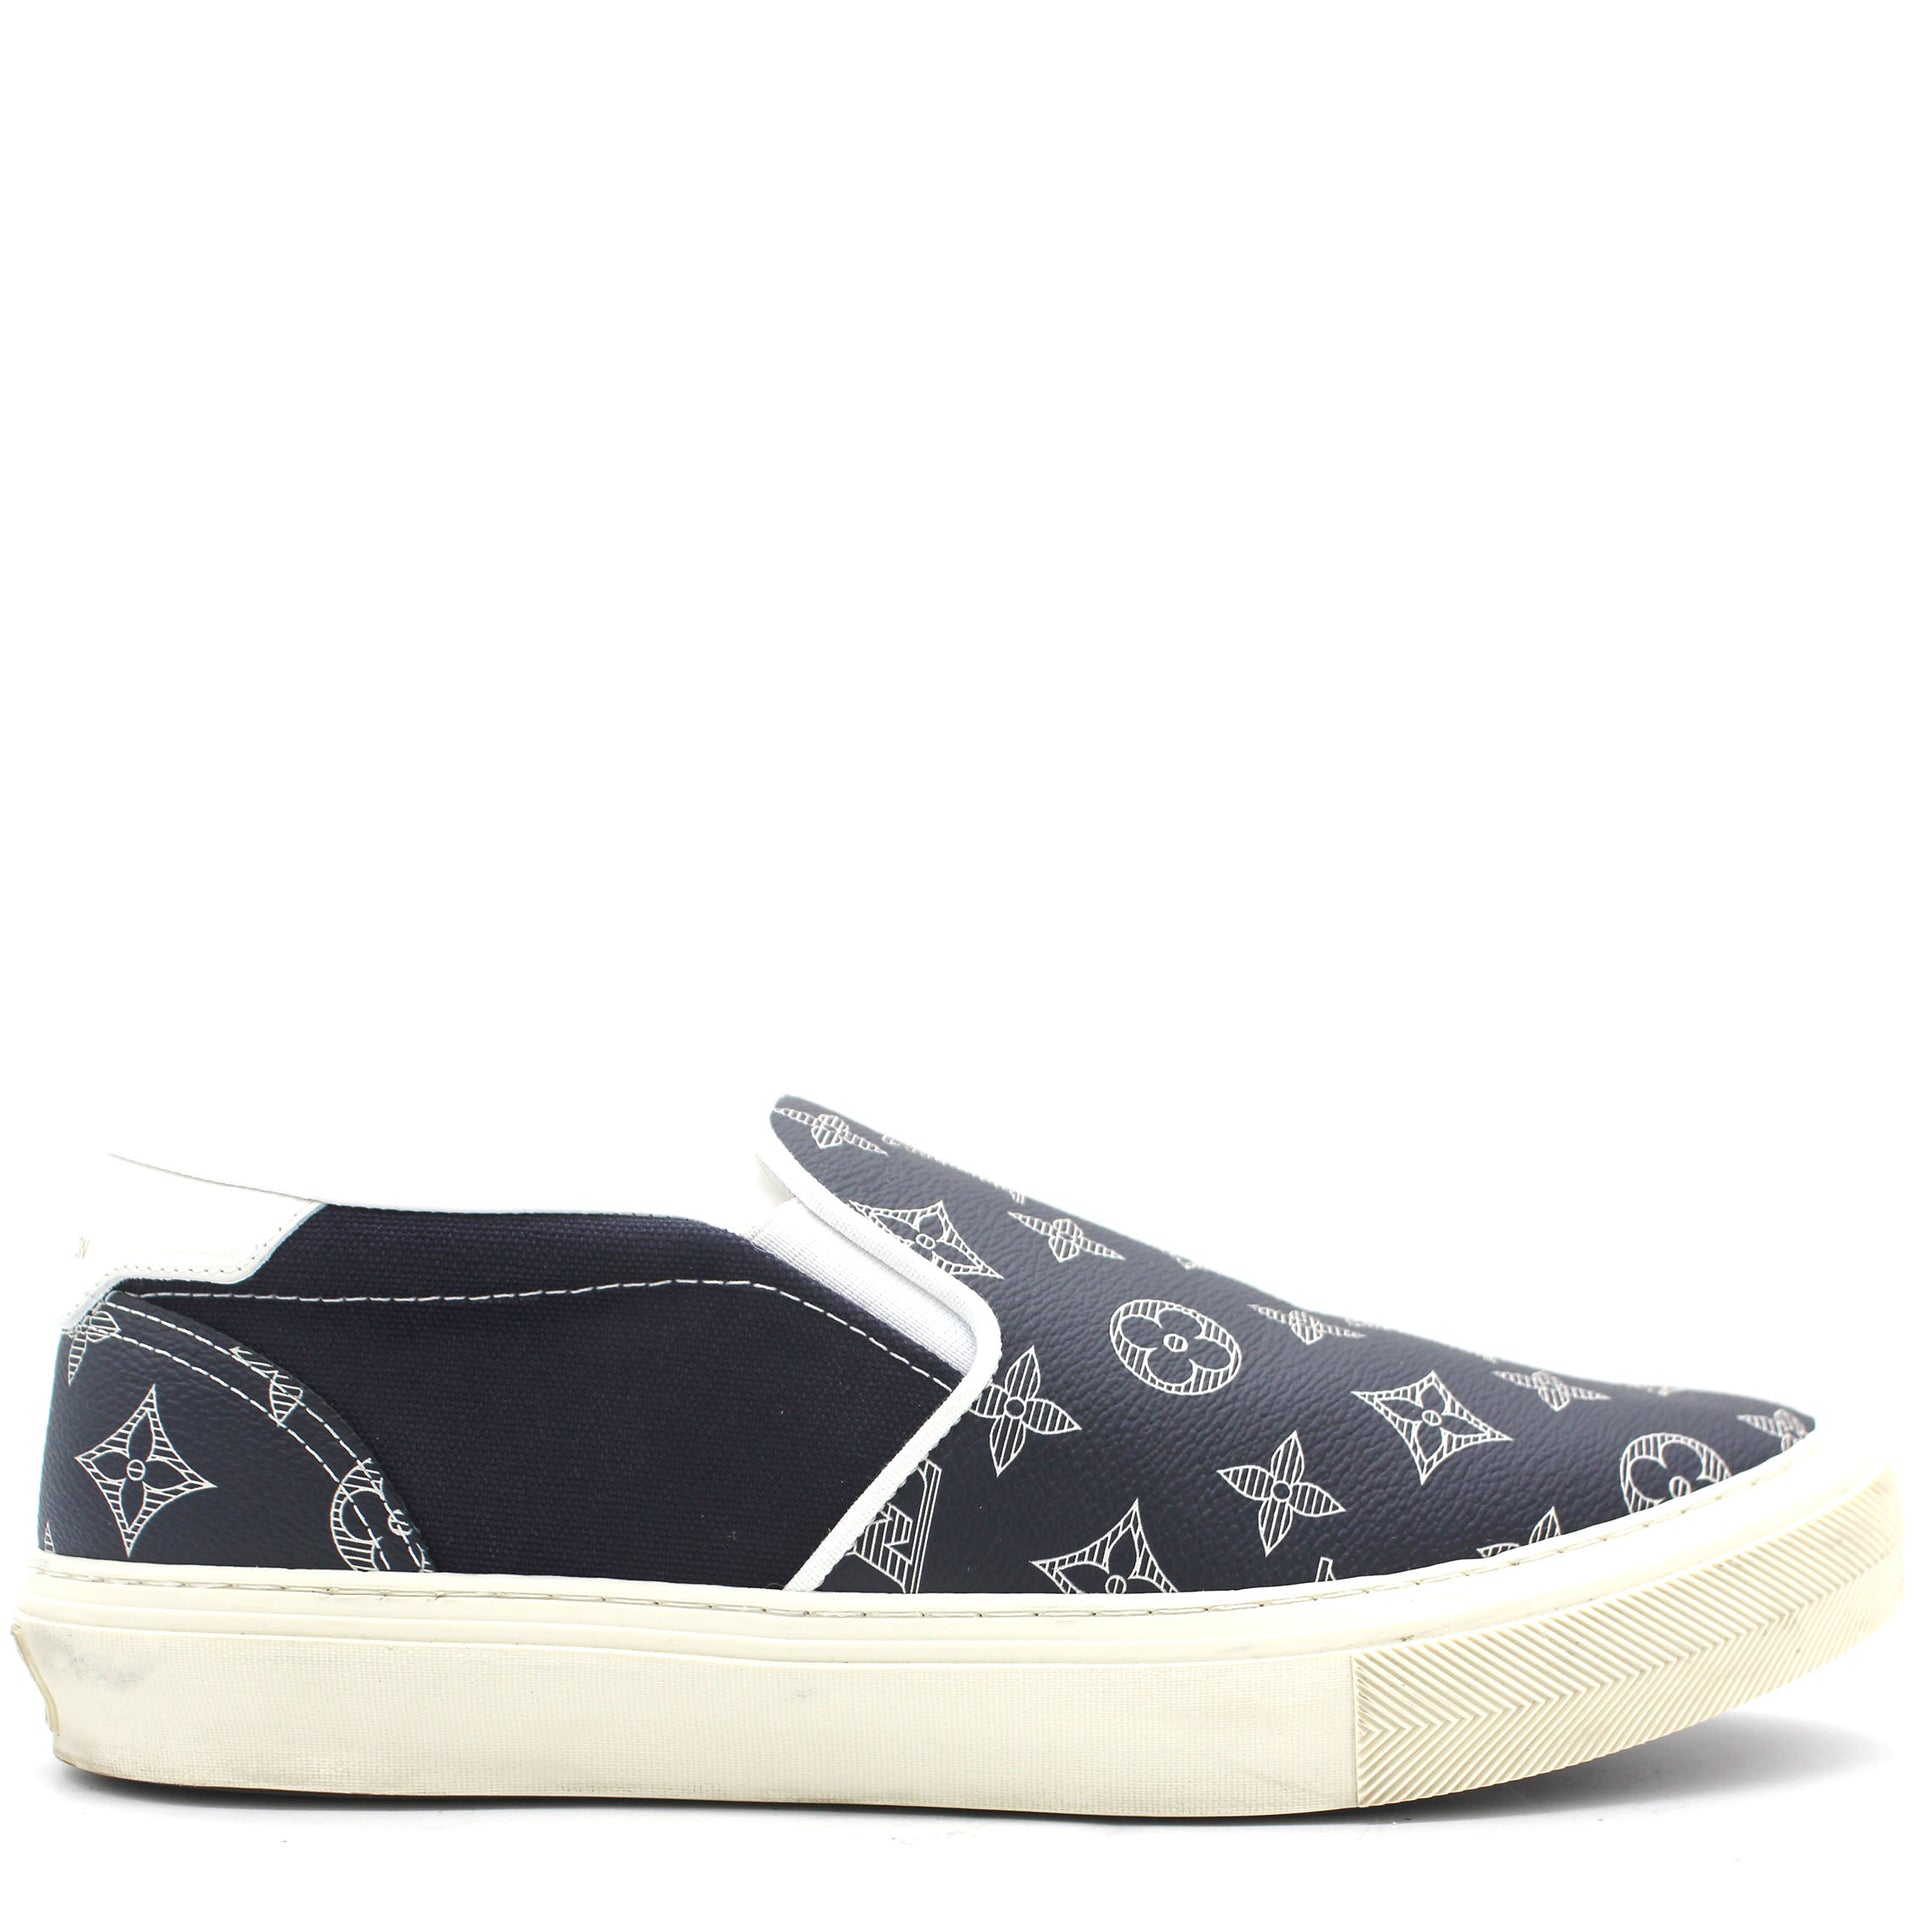 NEW LOUIS VUITTON TROCADERO LEATHER LOW TRAINERS IN BLUE LV